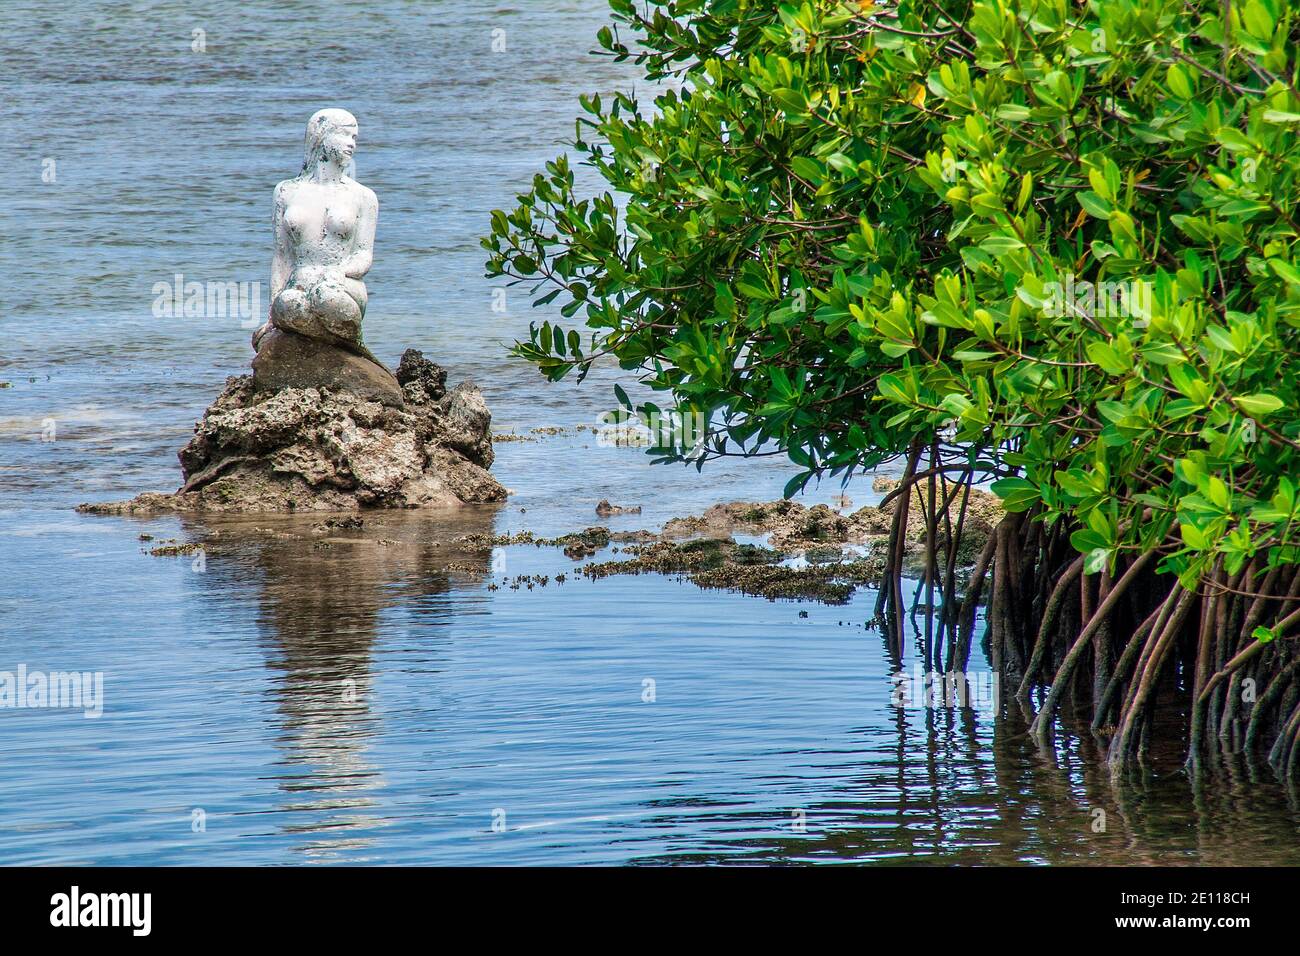 Statue of the Little Mermaid at the entrance to an inlet on Plantation Key in the Florida Keys. Stock Photo